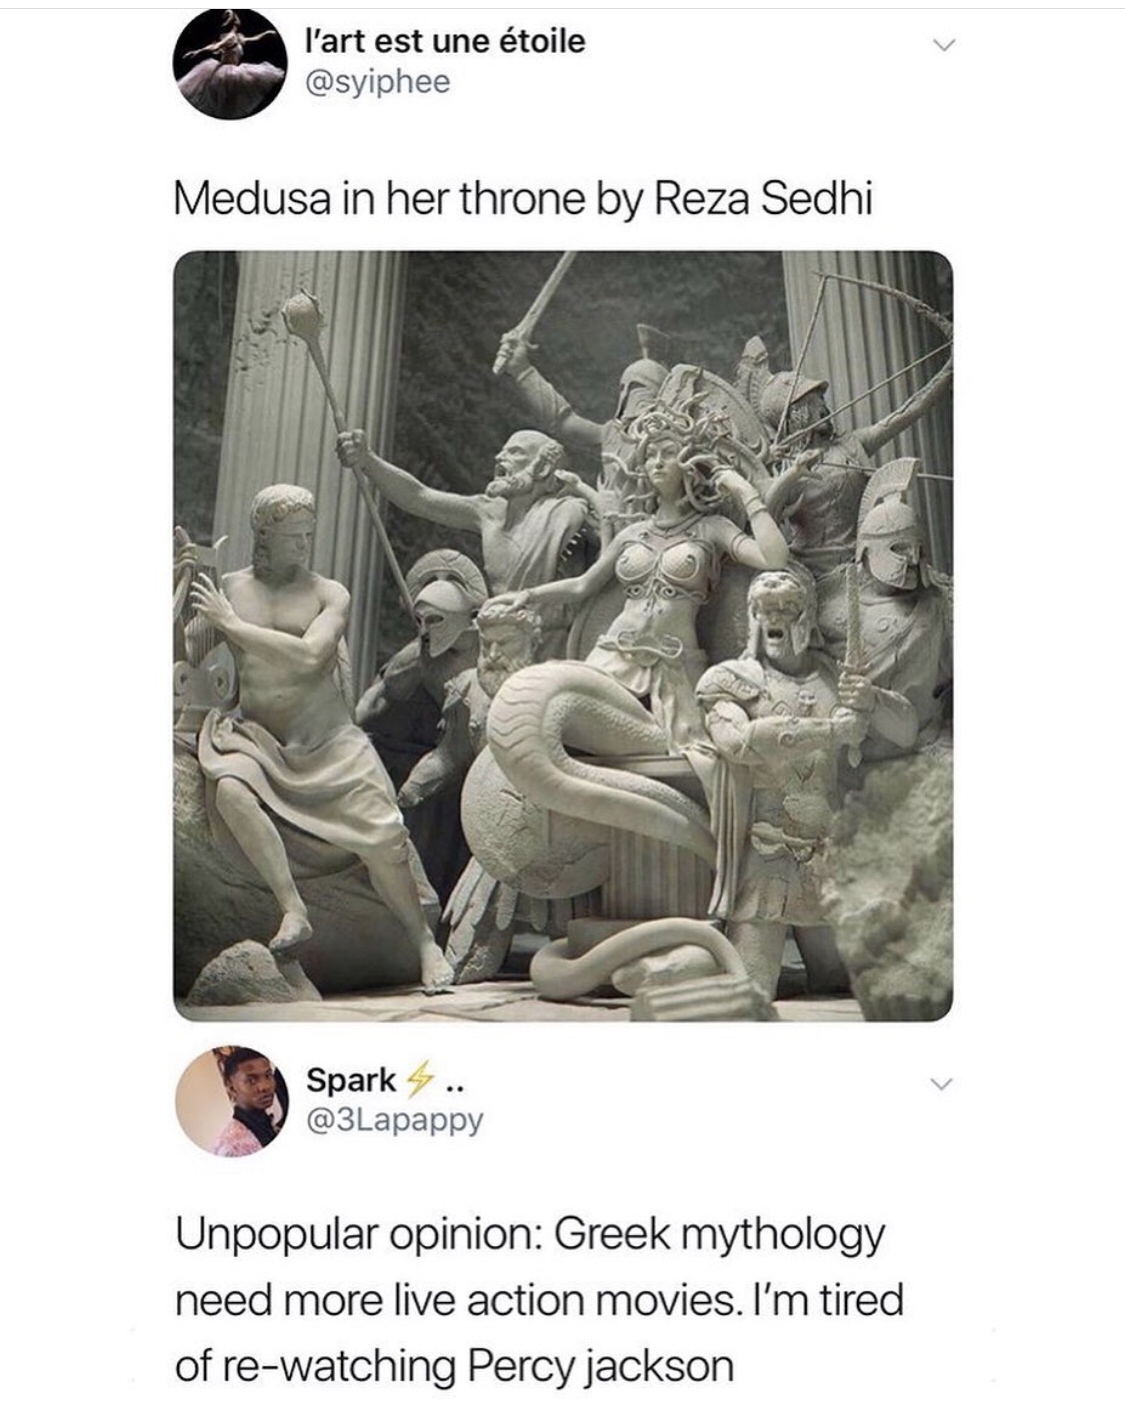 reza sedhi medusa - l'art est une toile Medusa in her throne by Reza Sedhi Spark 4.. Unpopular opinion Greek mythology need more live action movies. I'm tired of rewatching Percy jackson